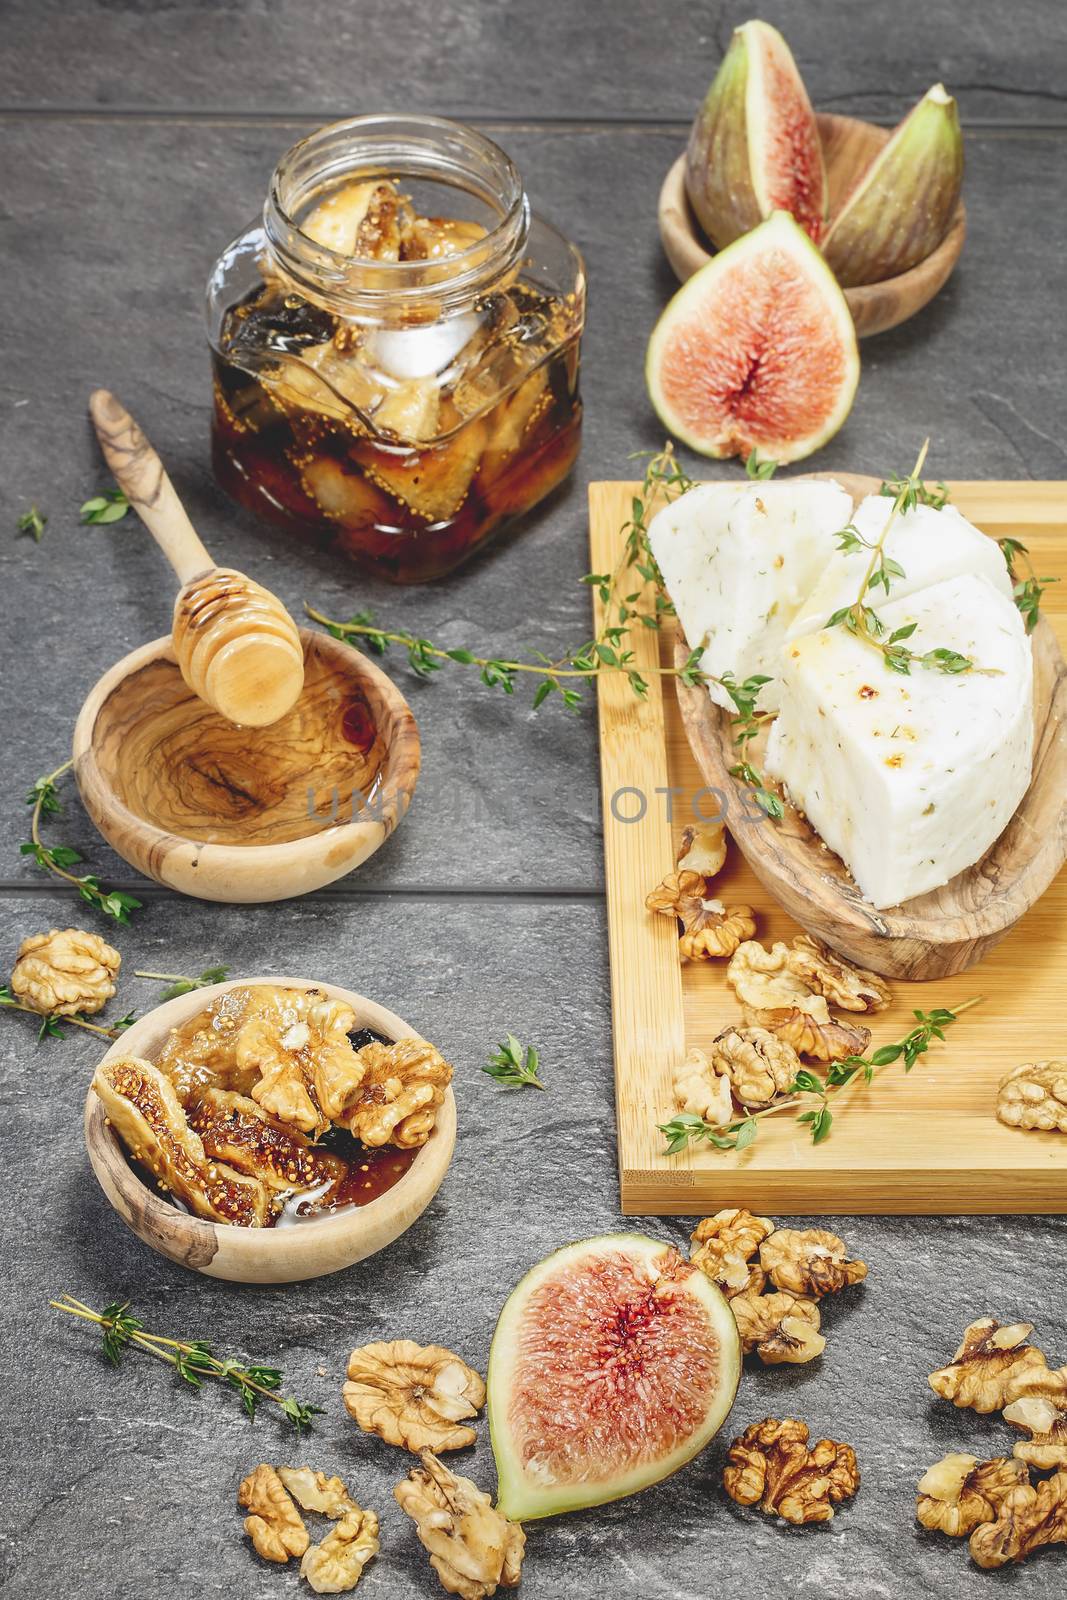 Cheese and fresh figs with honey and nuts by Slast20